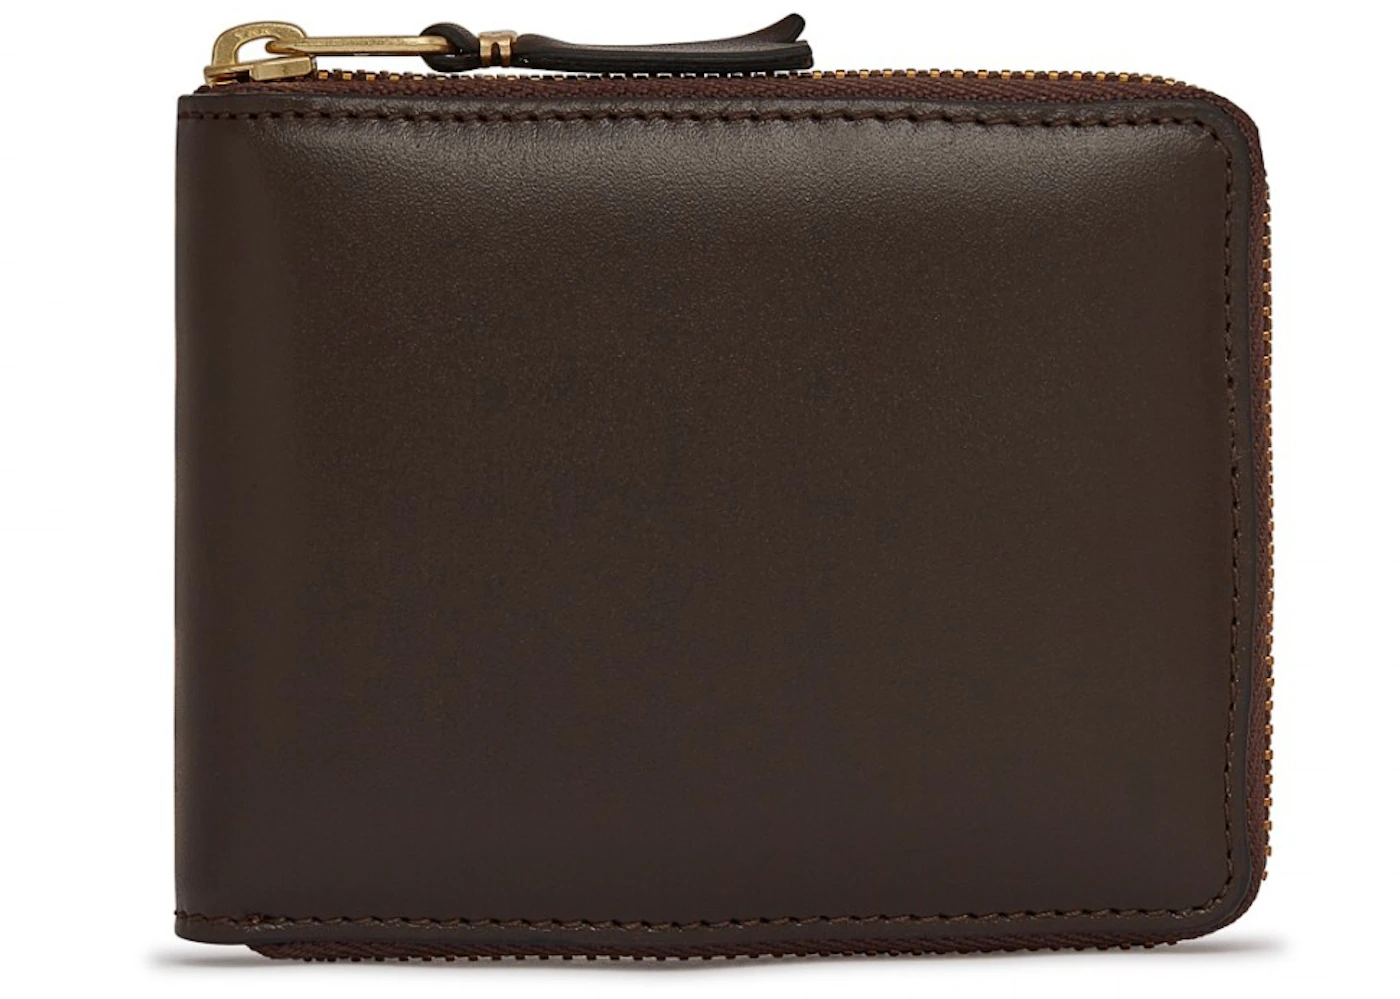 Comme des Garcons SA7100 Classic Plain Wallet Brown in Leather with ...